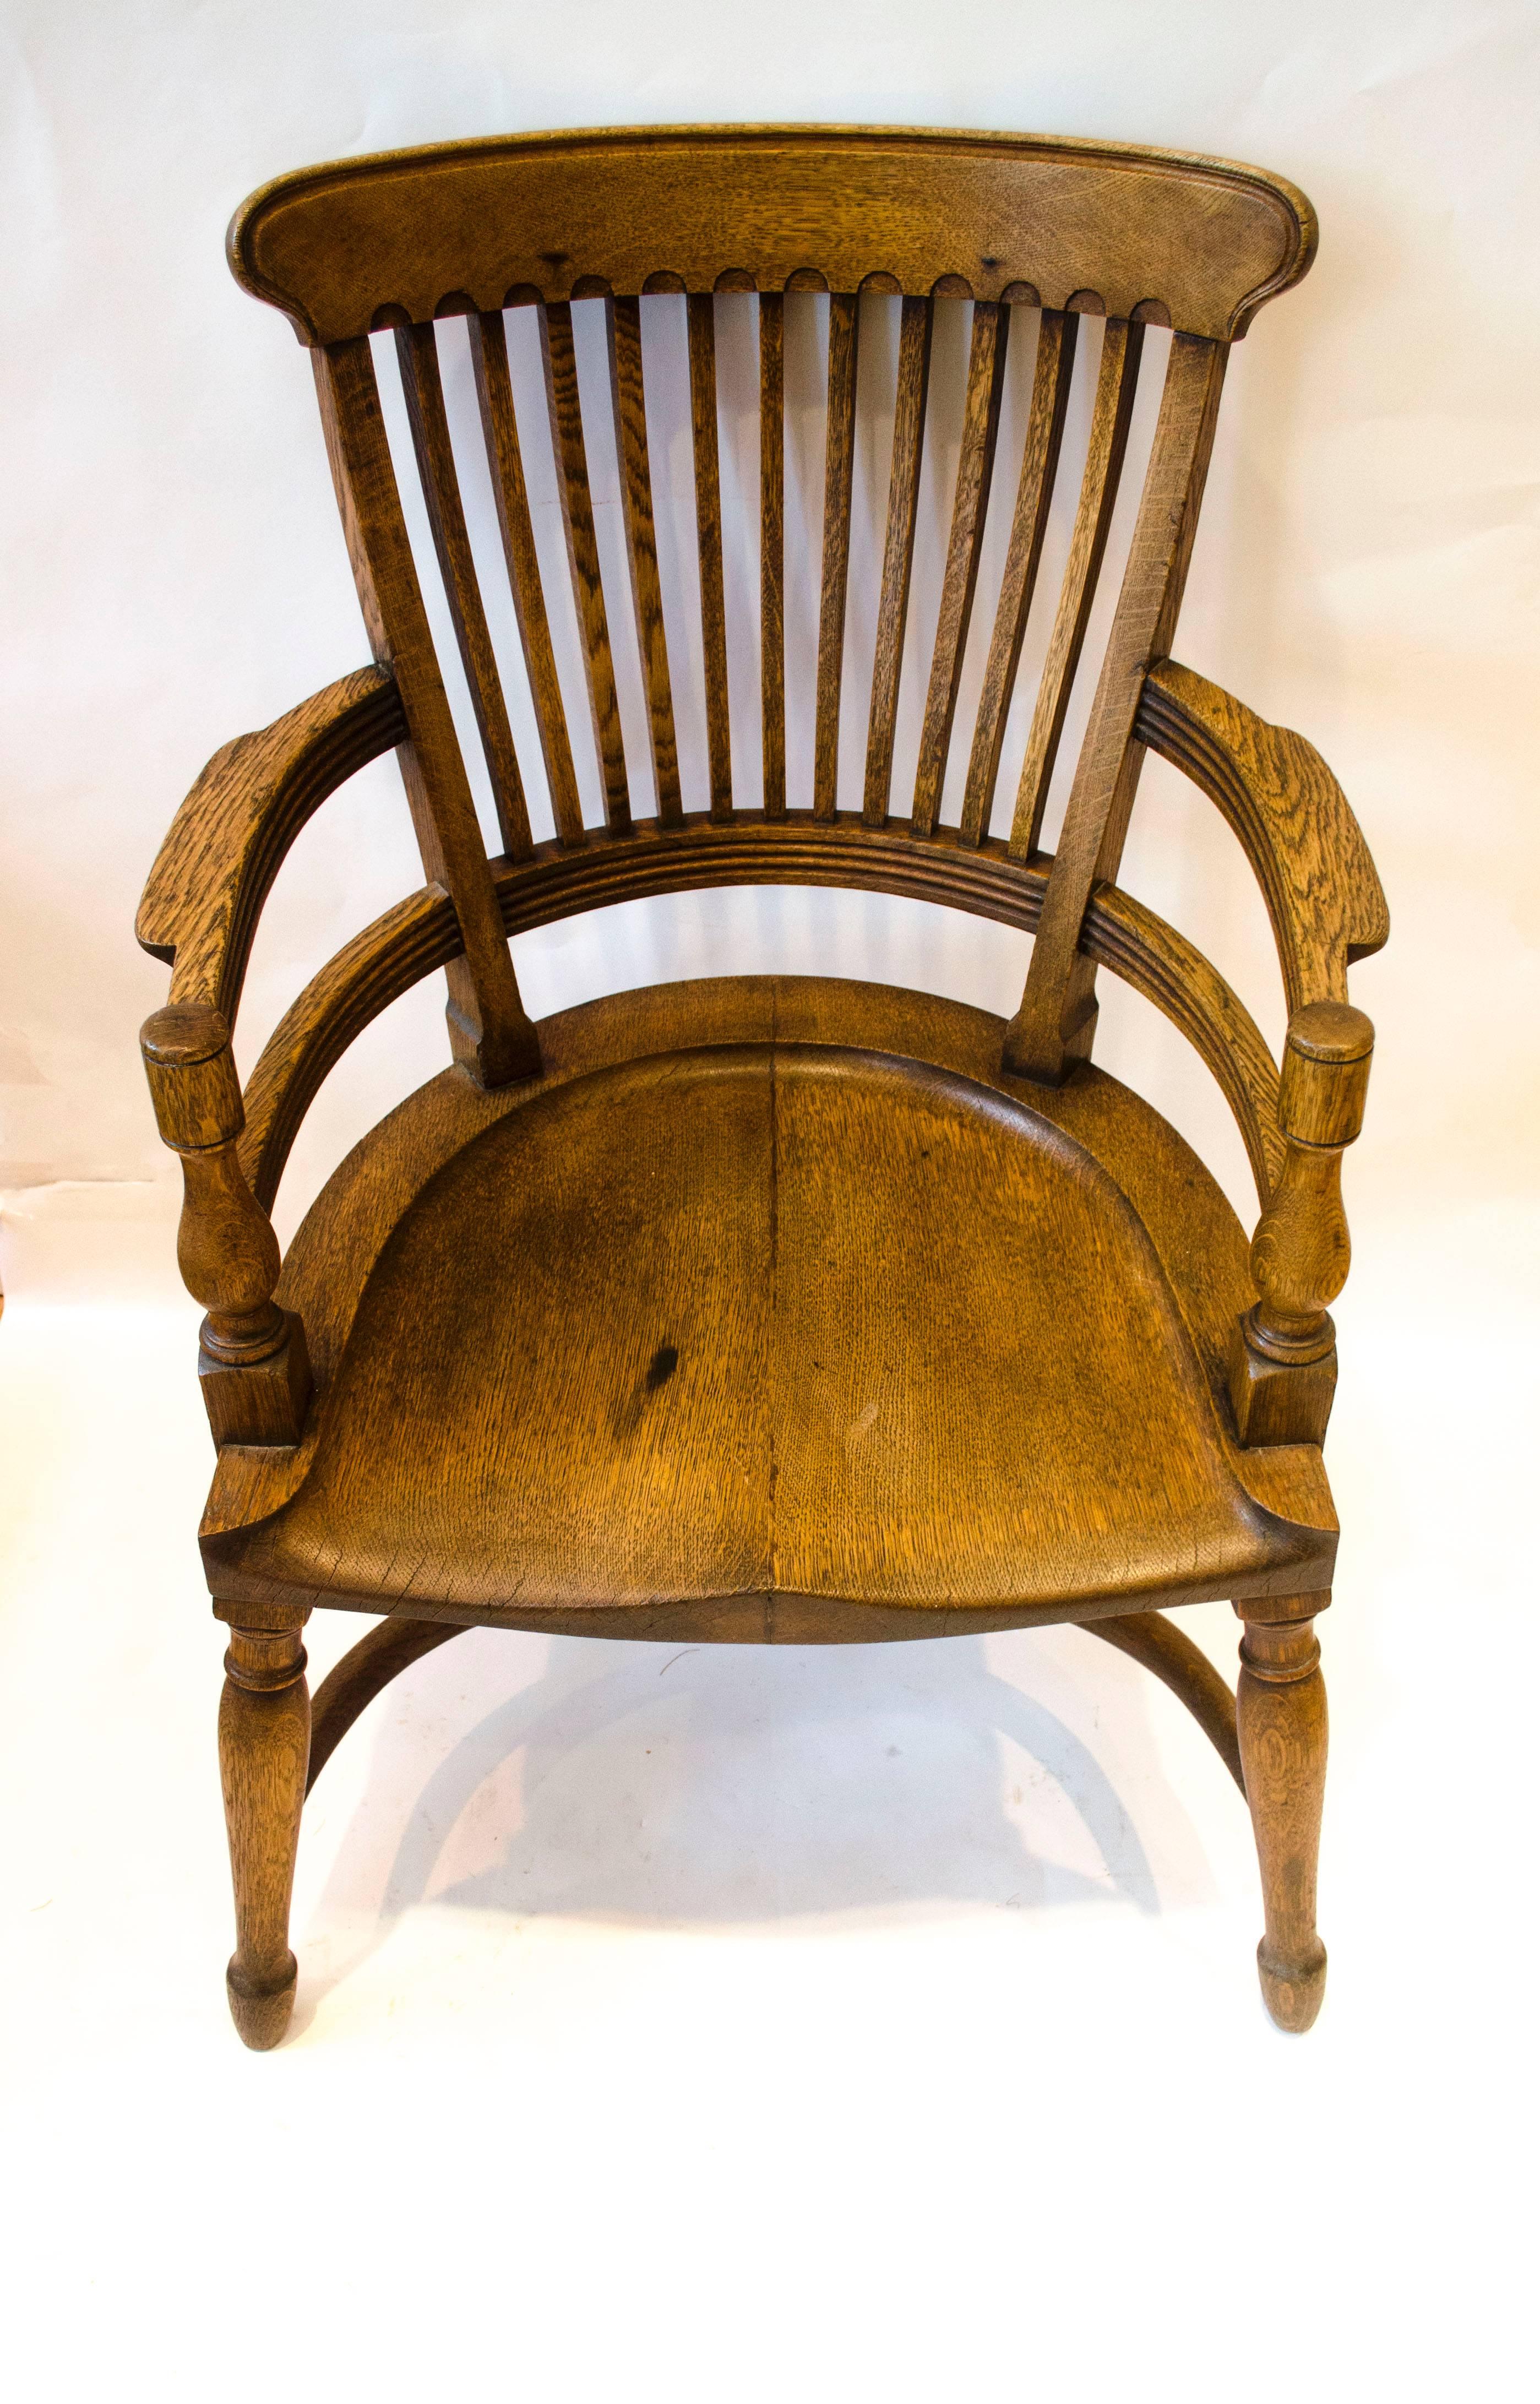 E. W. Godwin. Attr, An oak armchair with ergonomically perfectly shaped back, an incredibly comfortable armchair with a crinoline hoop stretcher.
Made by James Peddle or Smee. 
See the secular furniture of E. W. Godwin by Susan Weber Soros page 131.